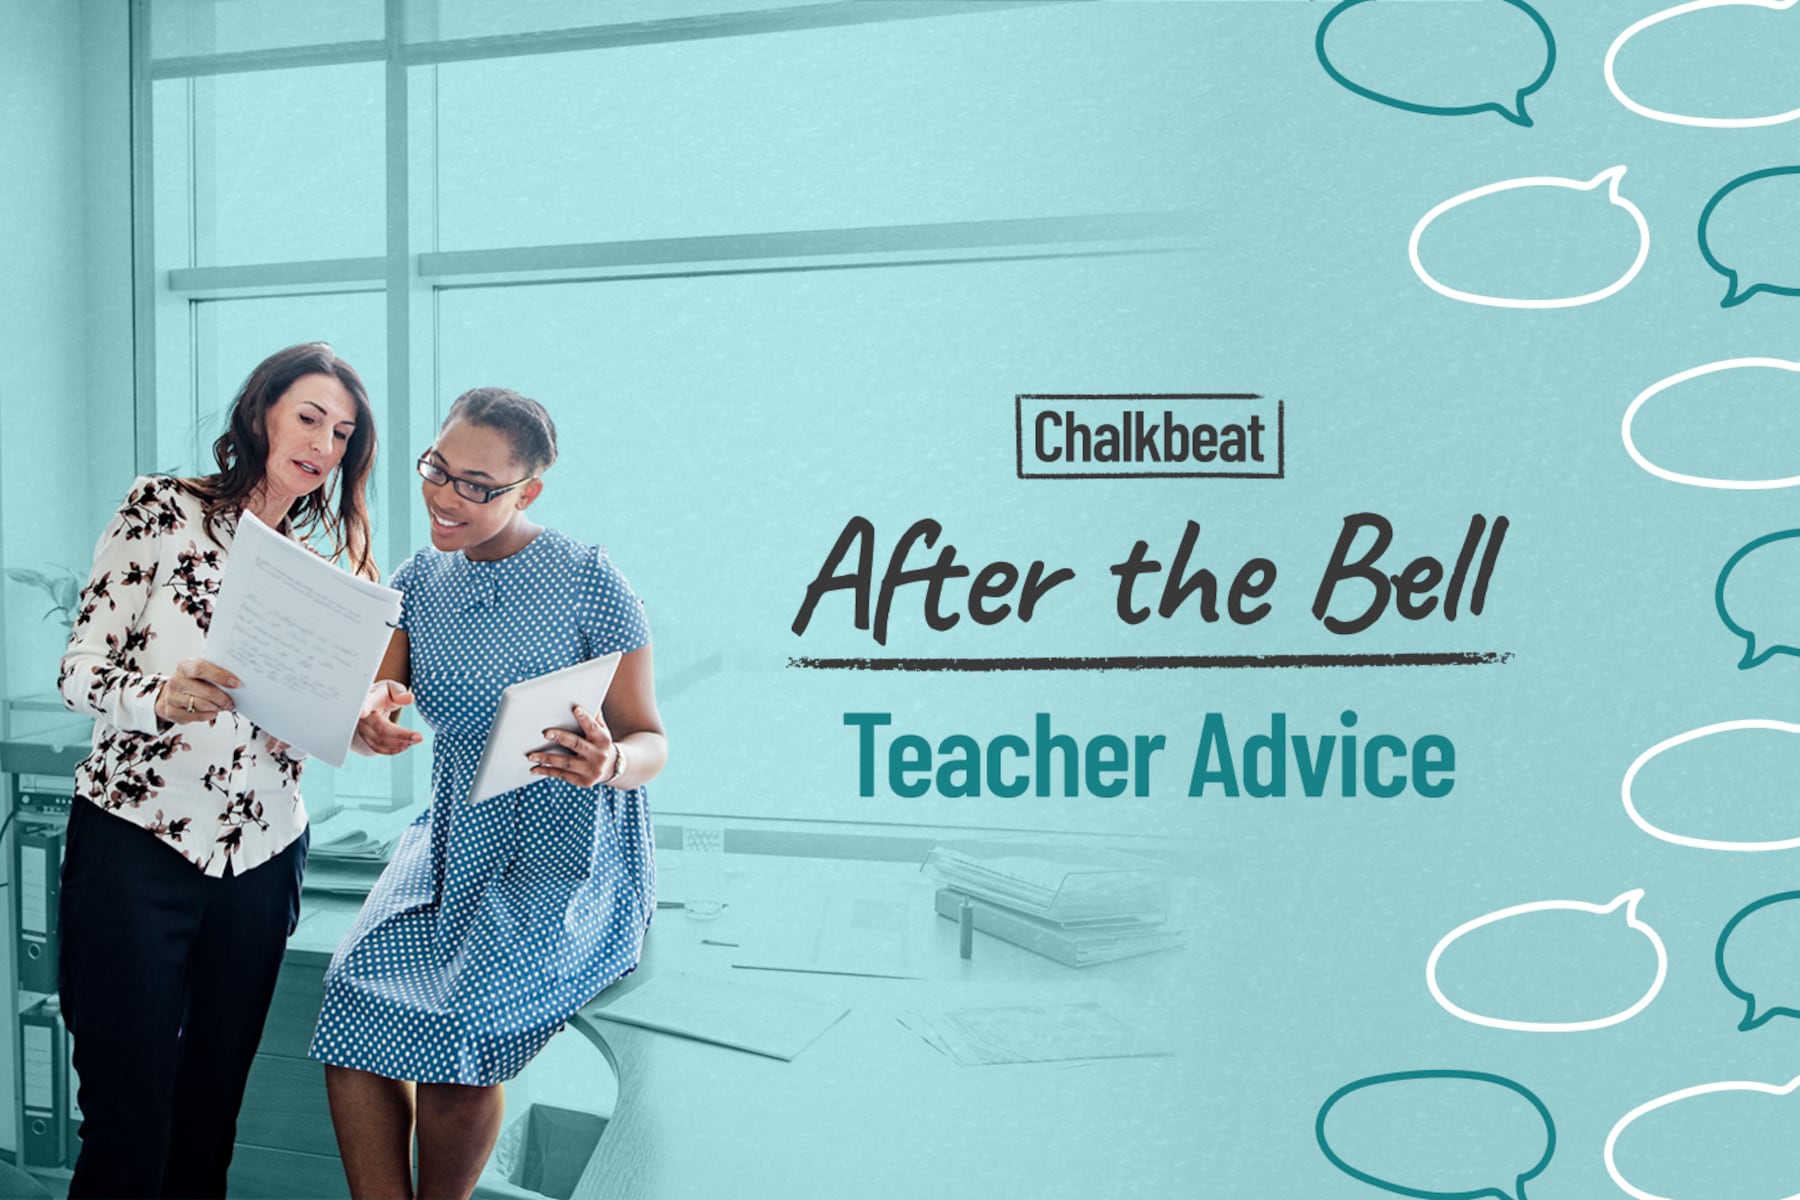 A photo illustration featuring two teachers, left, holding up papers and engaged in conversation, on the right there is a pattern of quote bubbles in teal and white. In the middle, text reads: Chalkbeat After the Bell: Teacher Advice.